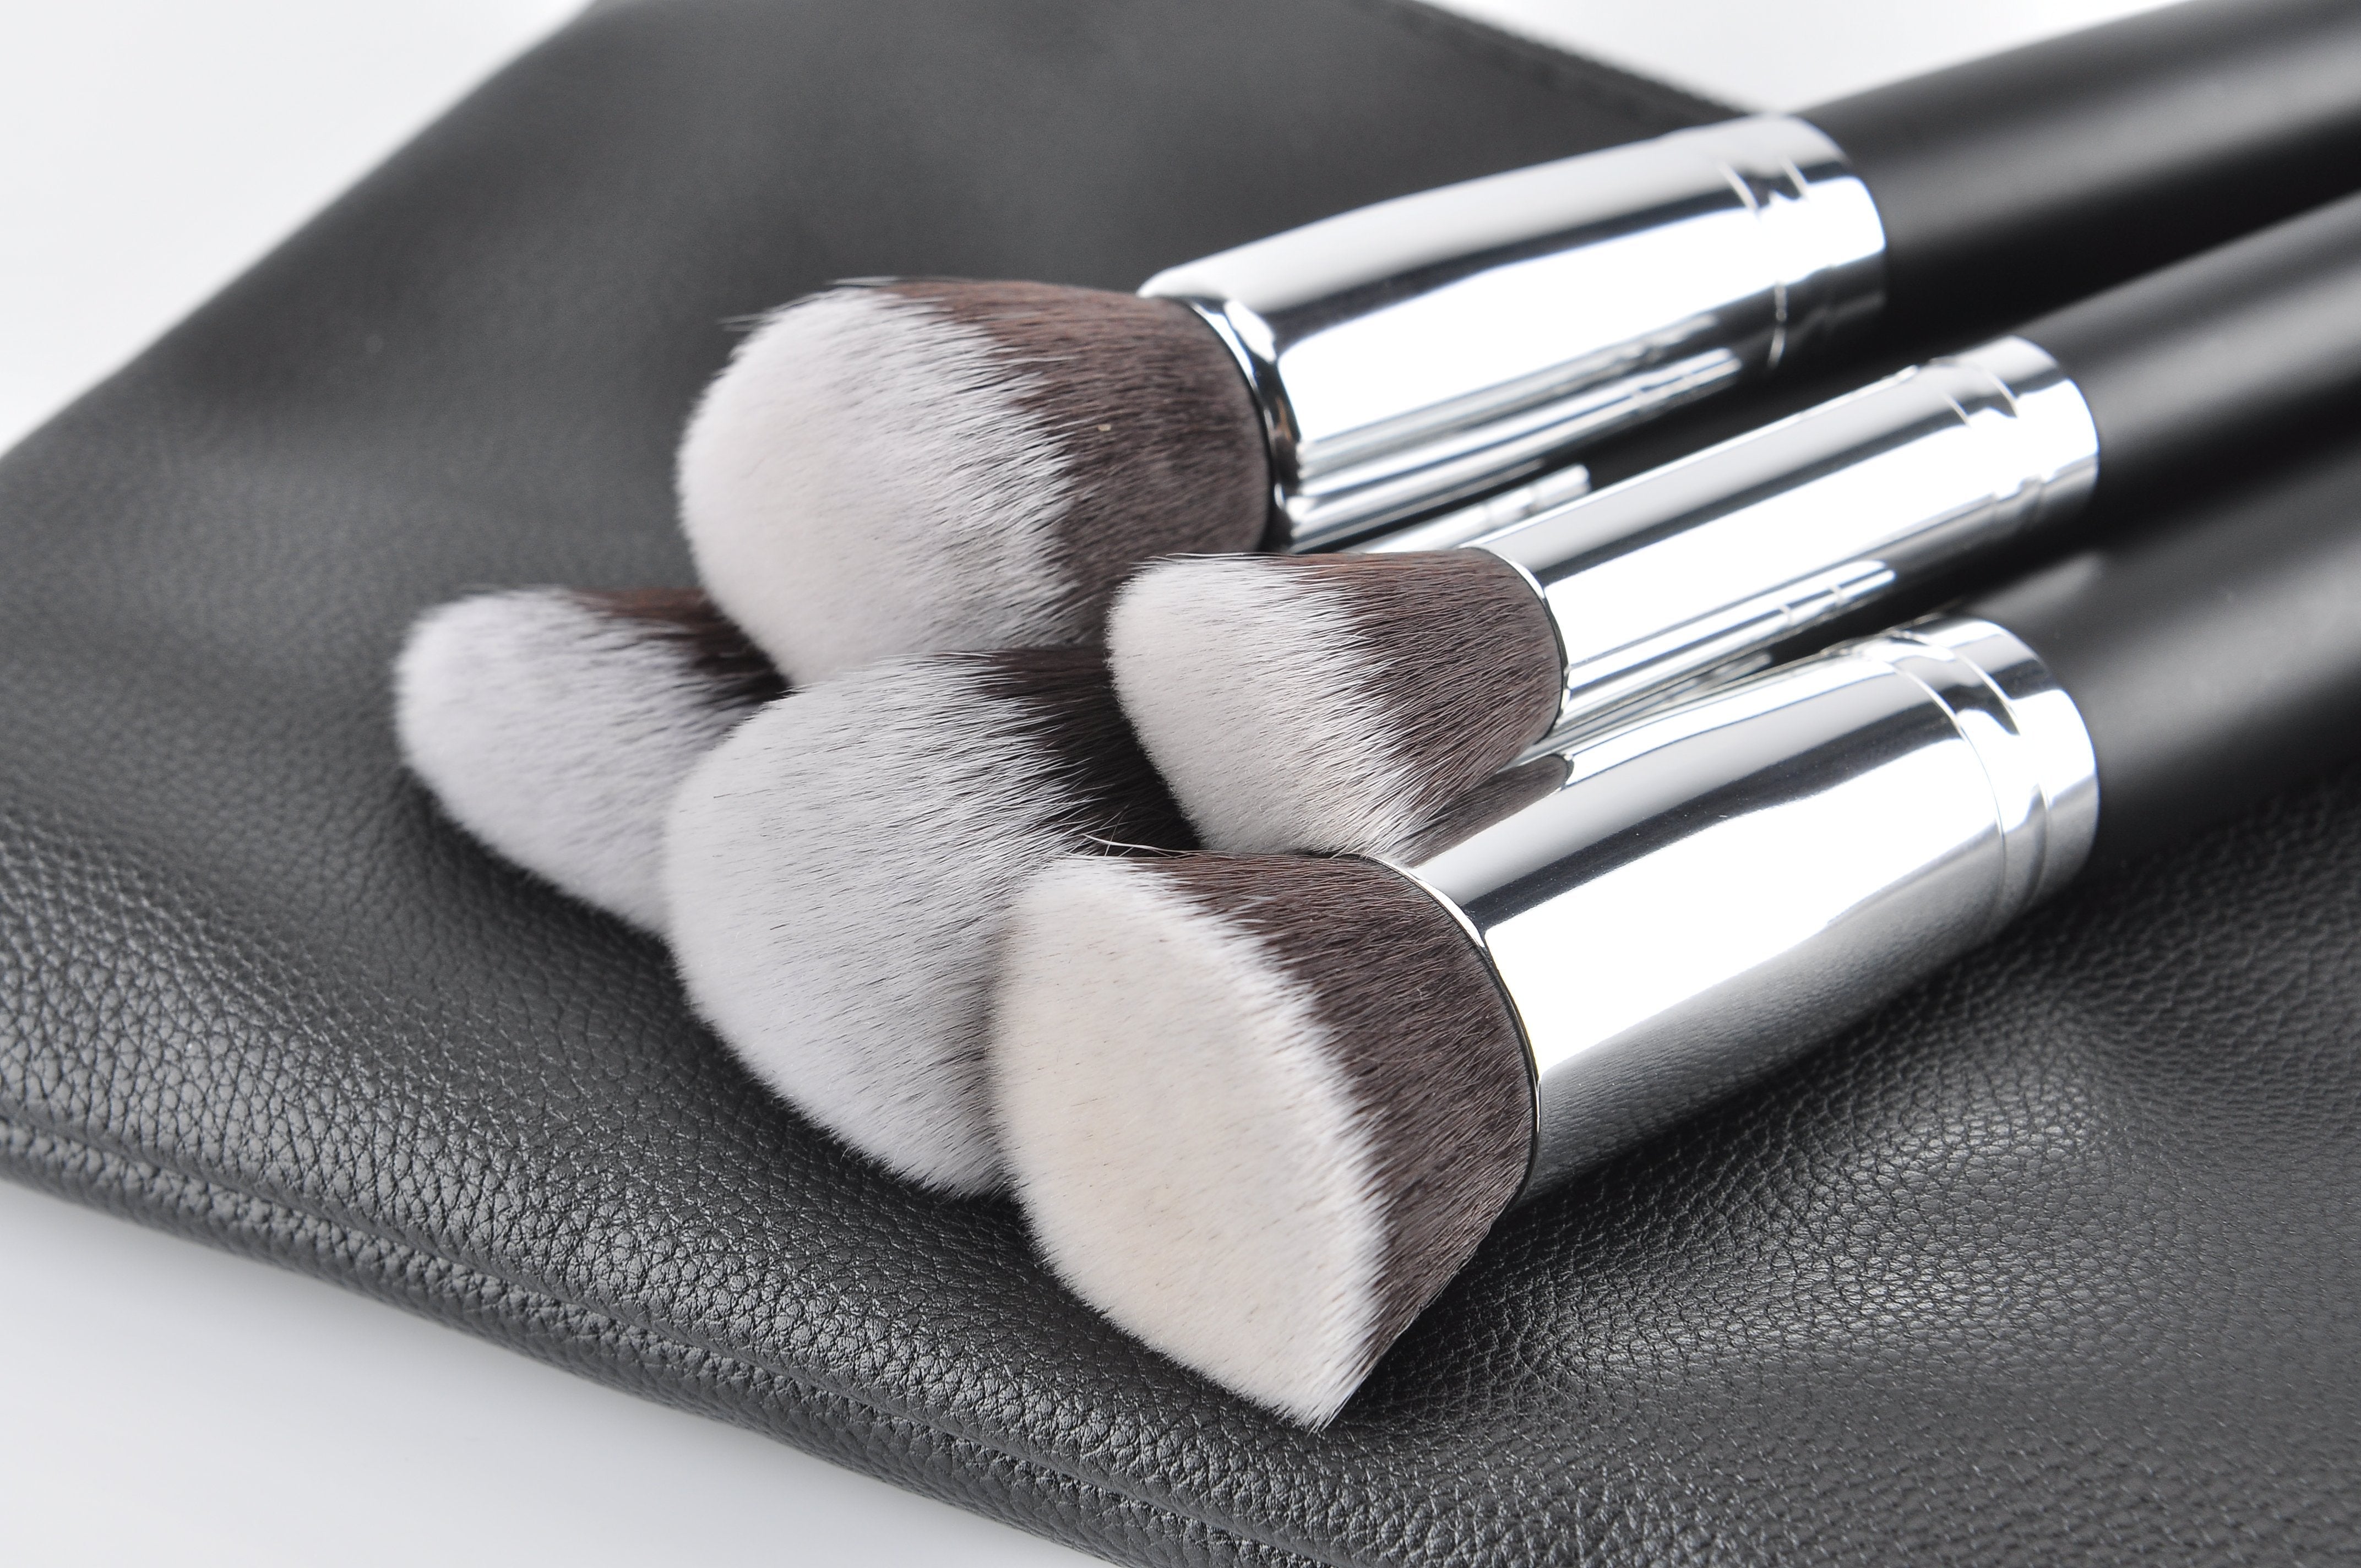 FLAWLESS 15Pcs Blending Cosmetic Shadow Make Up Brushes